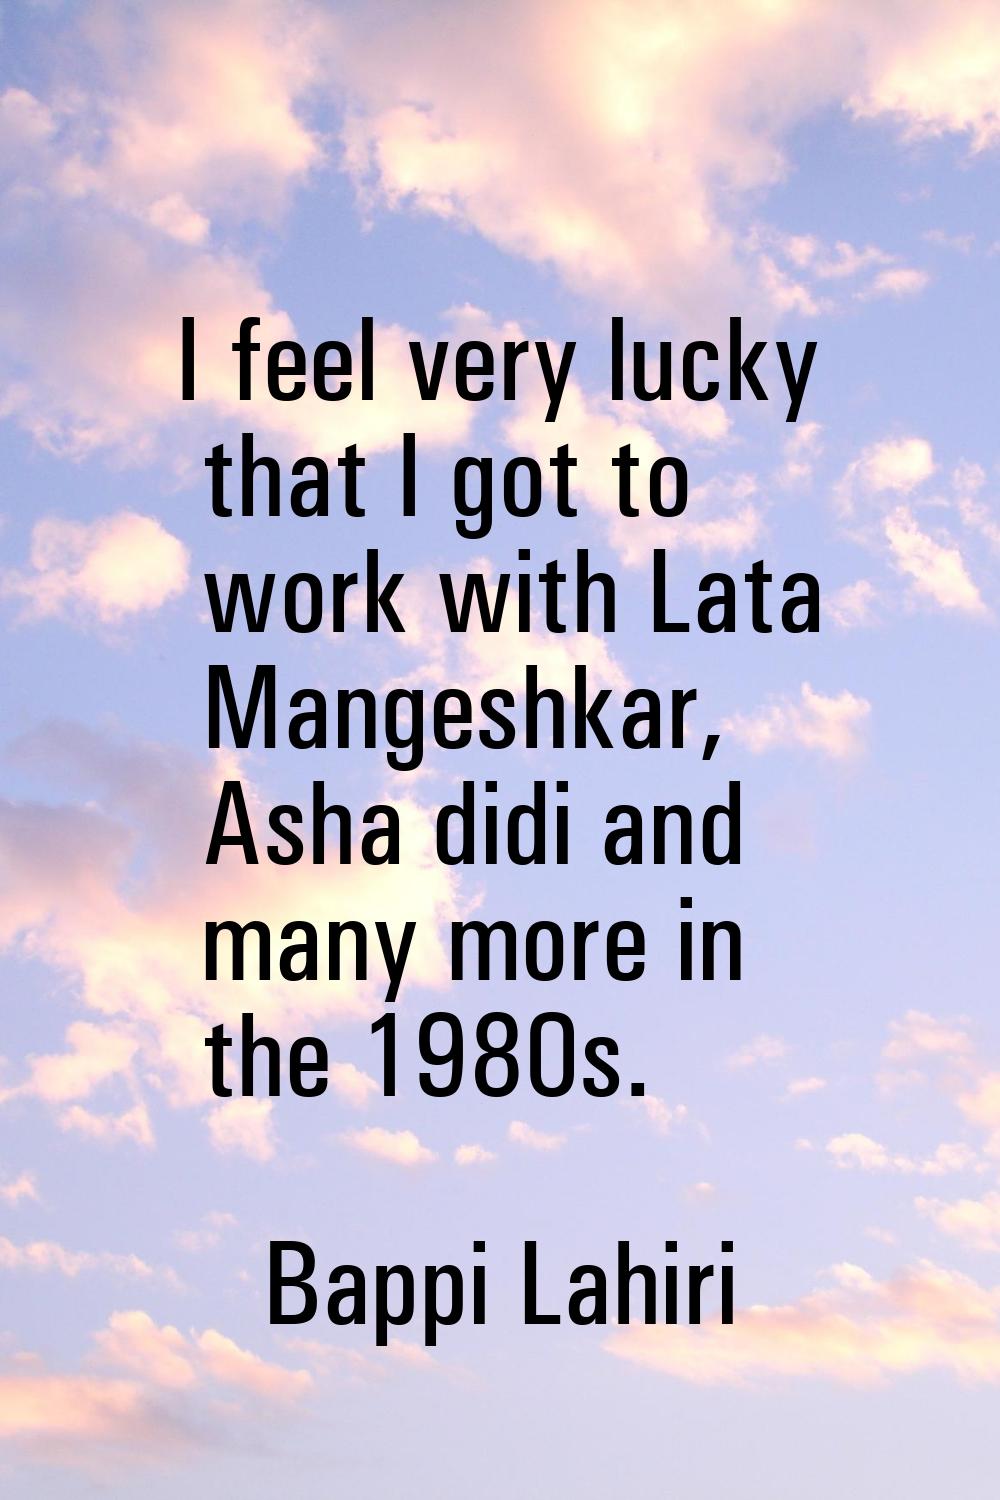 I feel very lucky that I got to work with Lata Mangeshkar, Asha didi and many more in the 1980s.